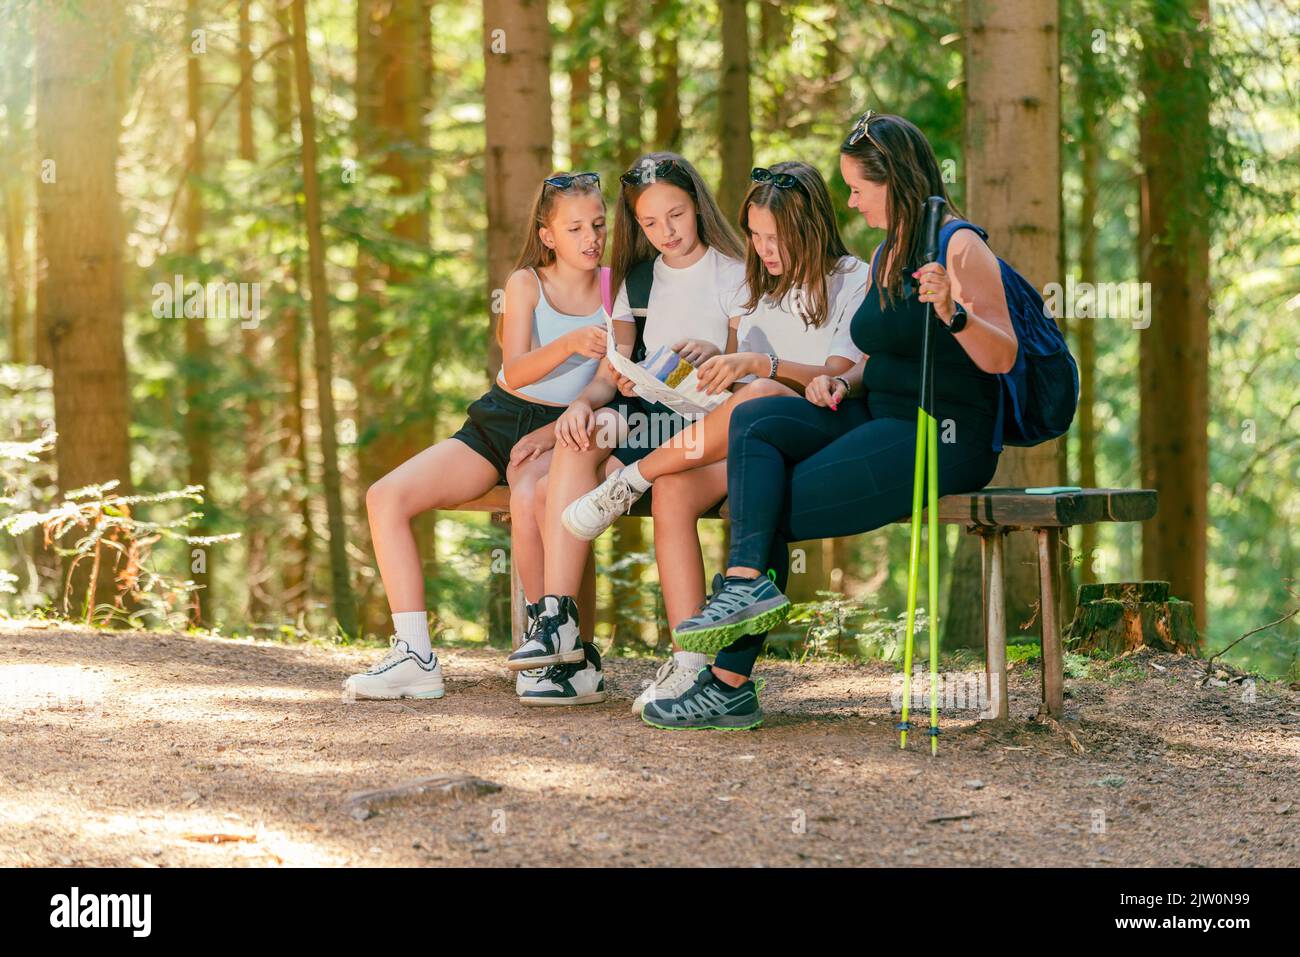 Female hikers sit on a  wooden bench in a forest path and read a map of hiking trails Stock Photo